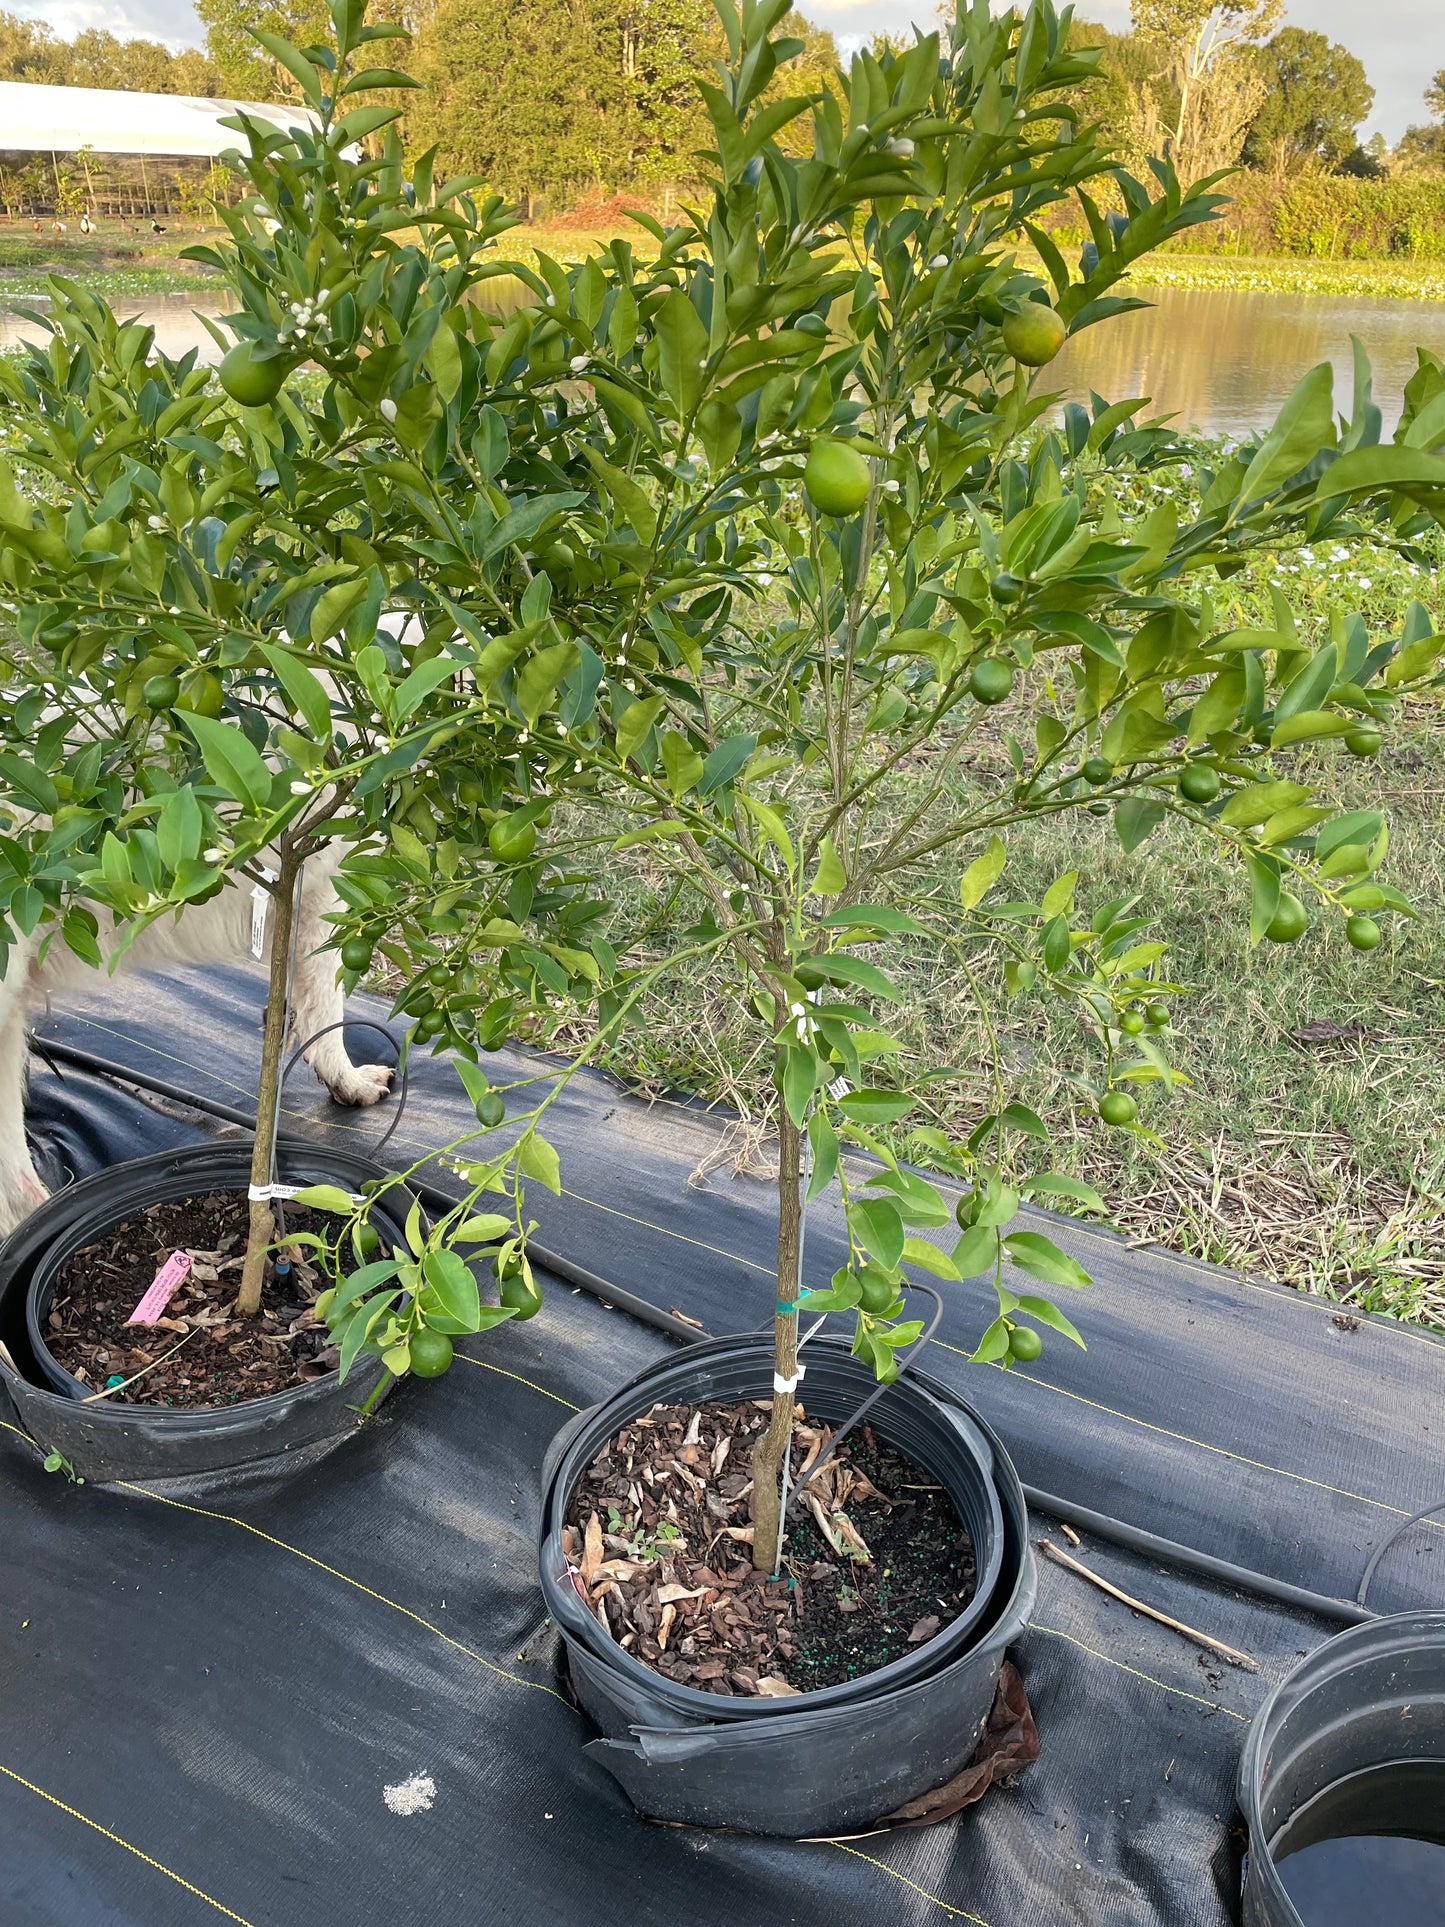 15 gallon Keylime tree with fruit - free ship